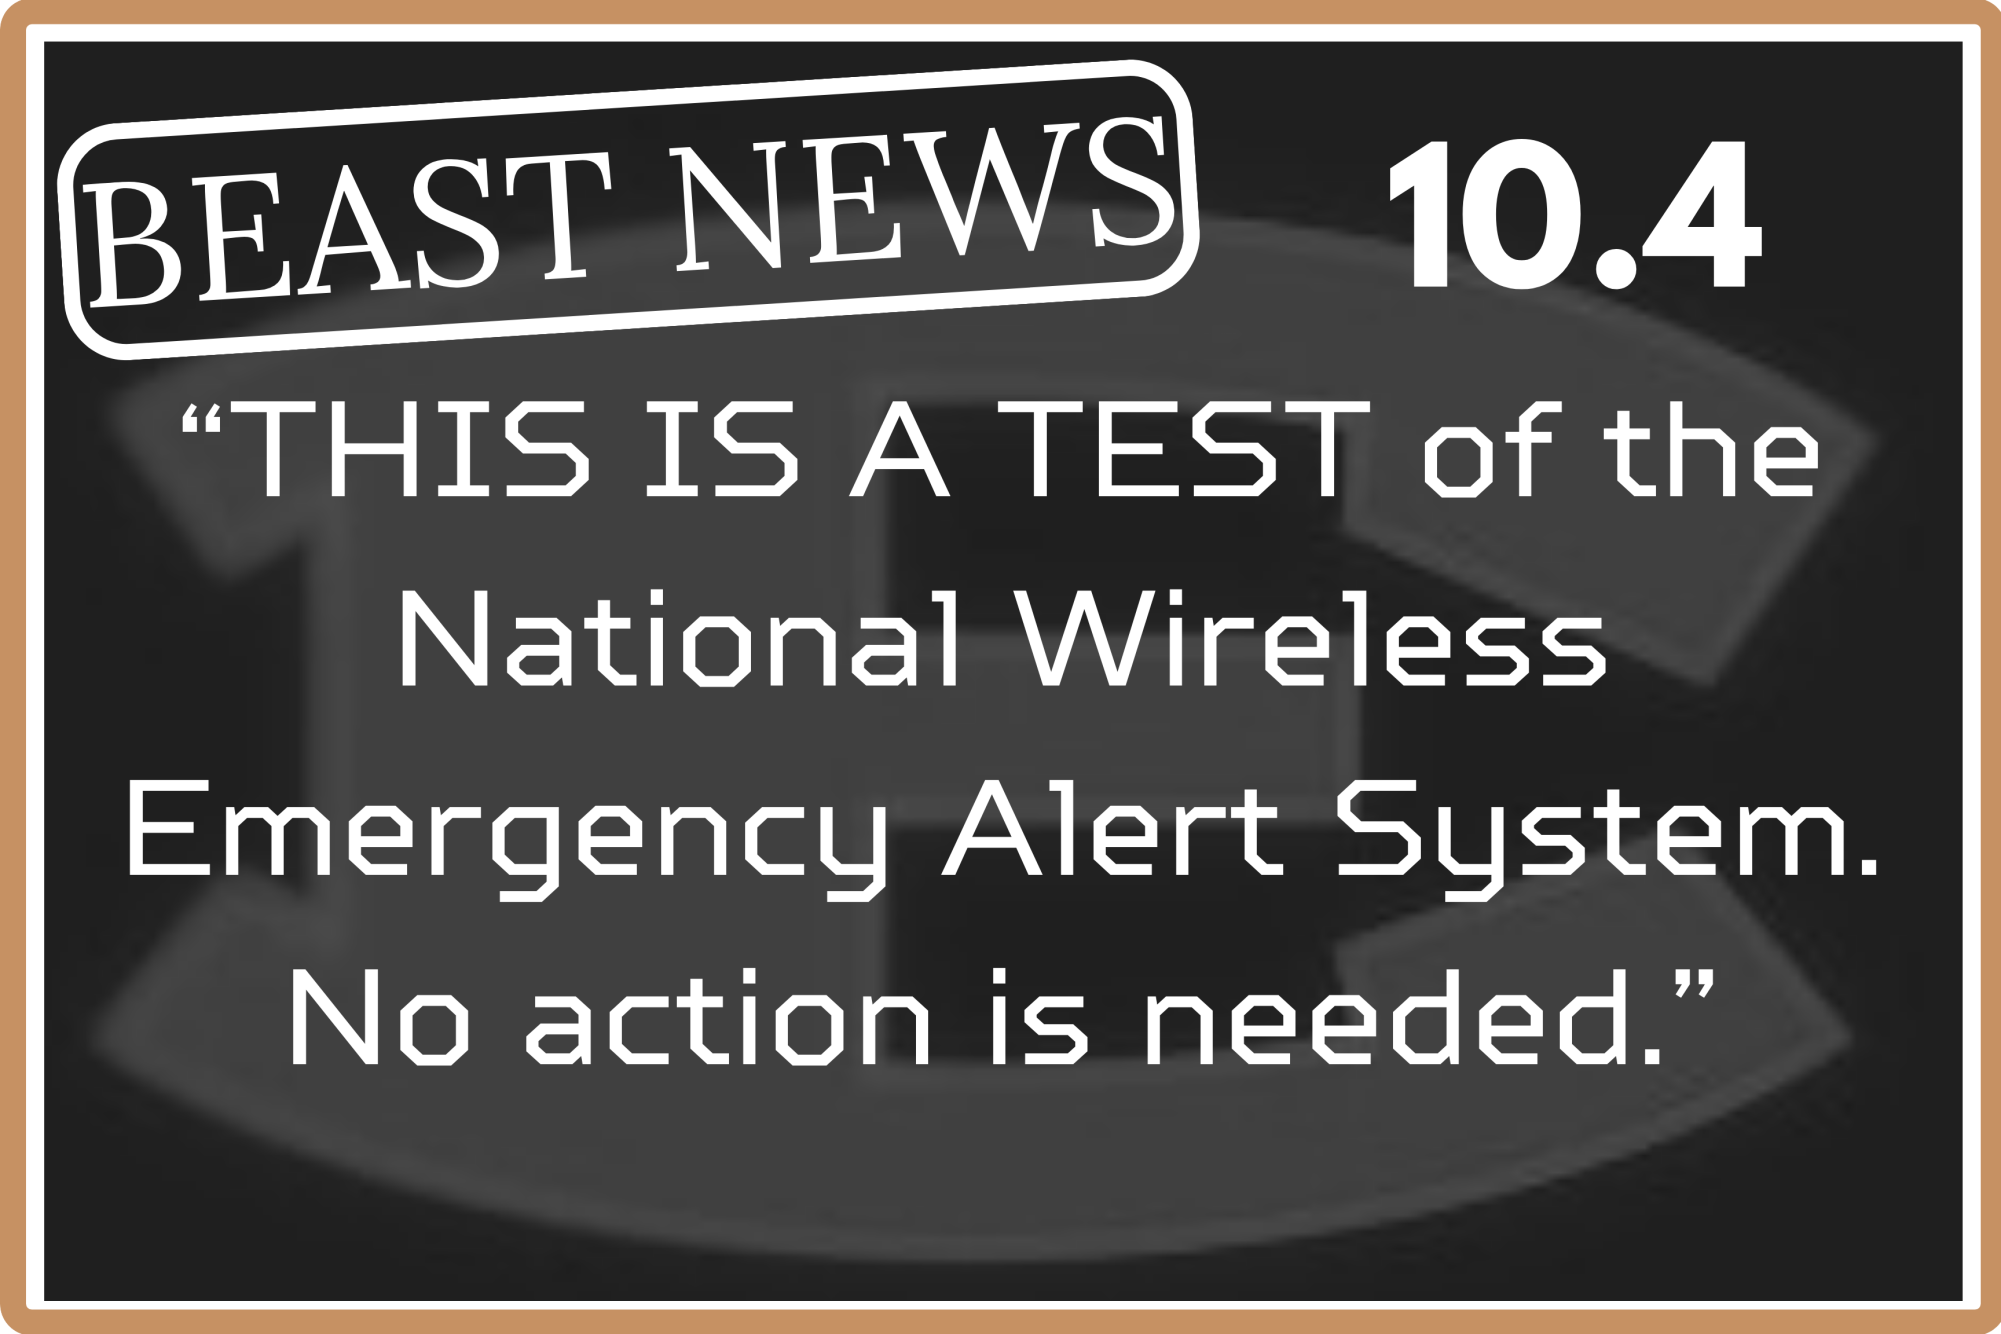 Today is the National Emergency Alert